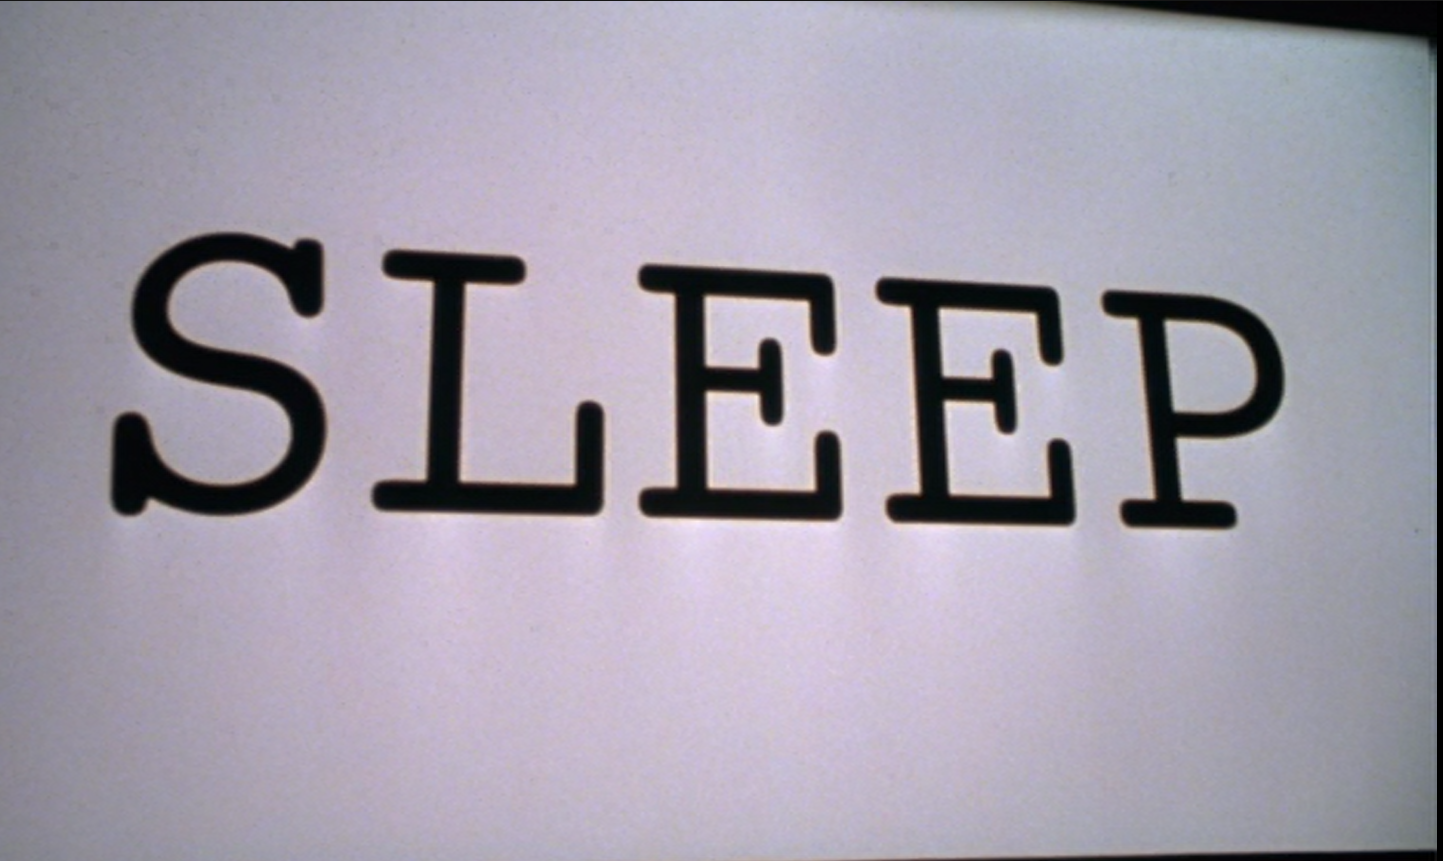 the word 'sleep' appears on the movie screen in Stir of Echoes